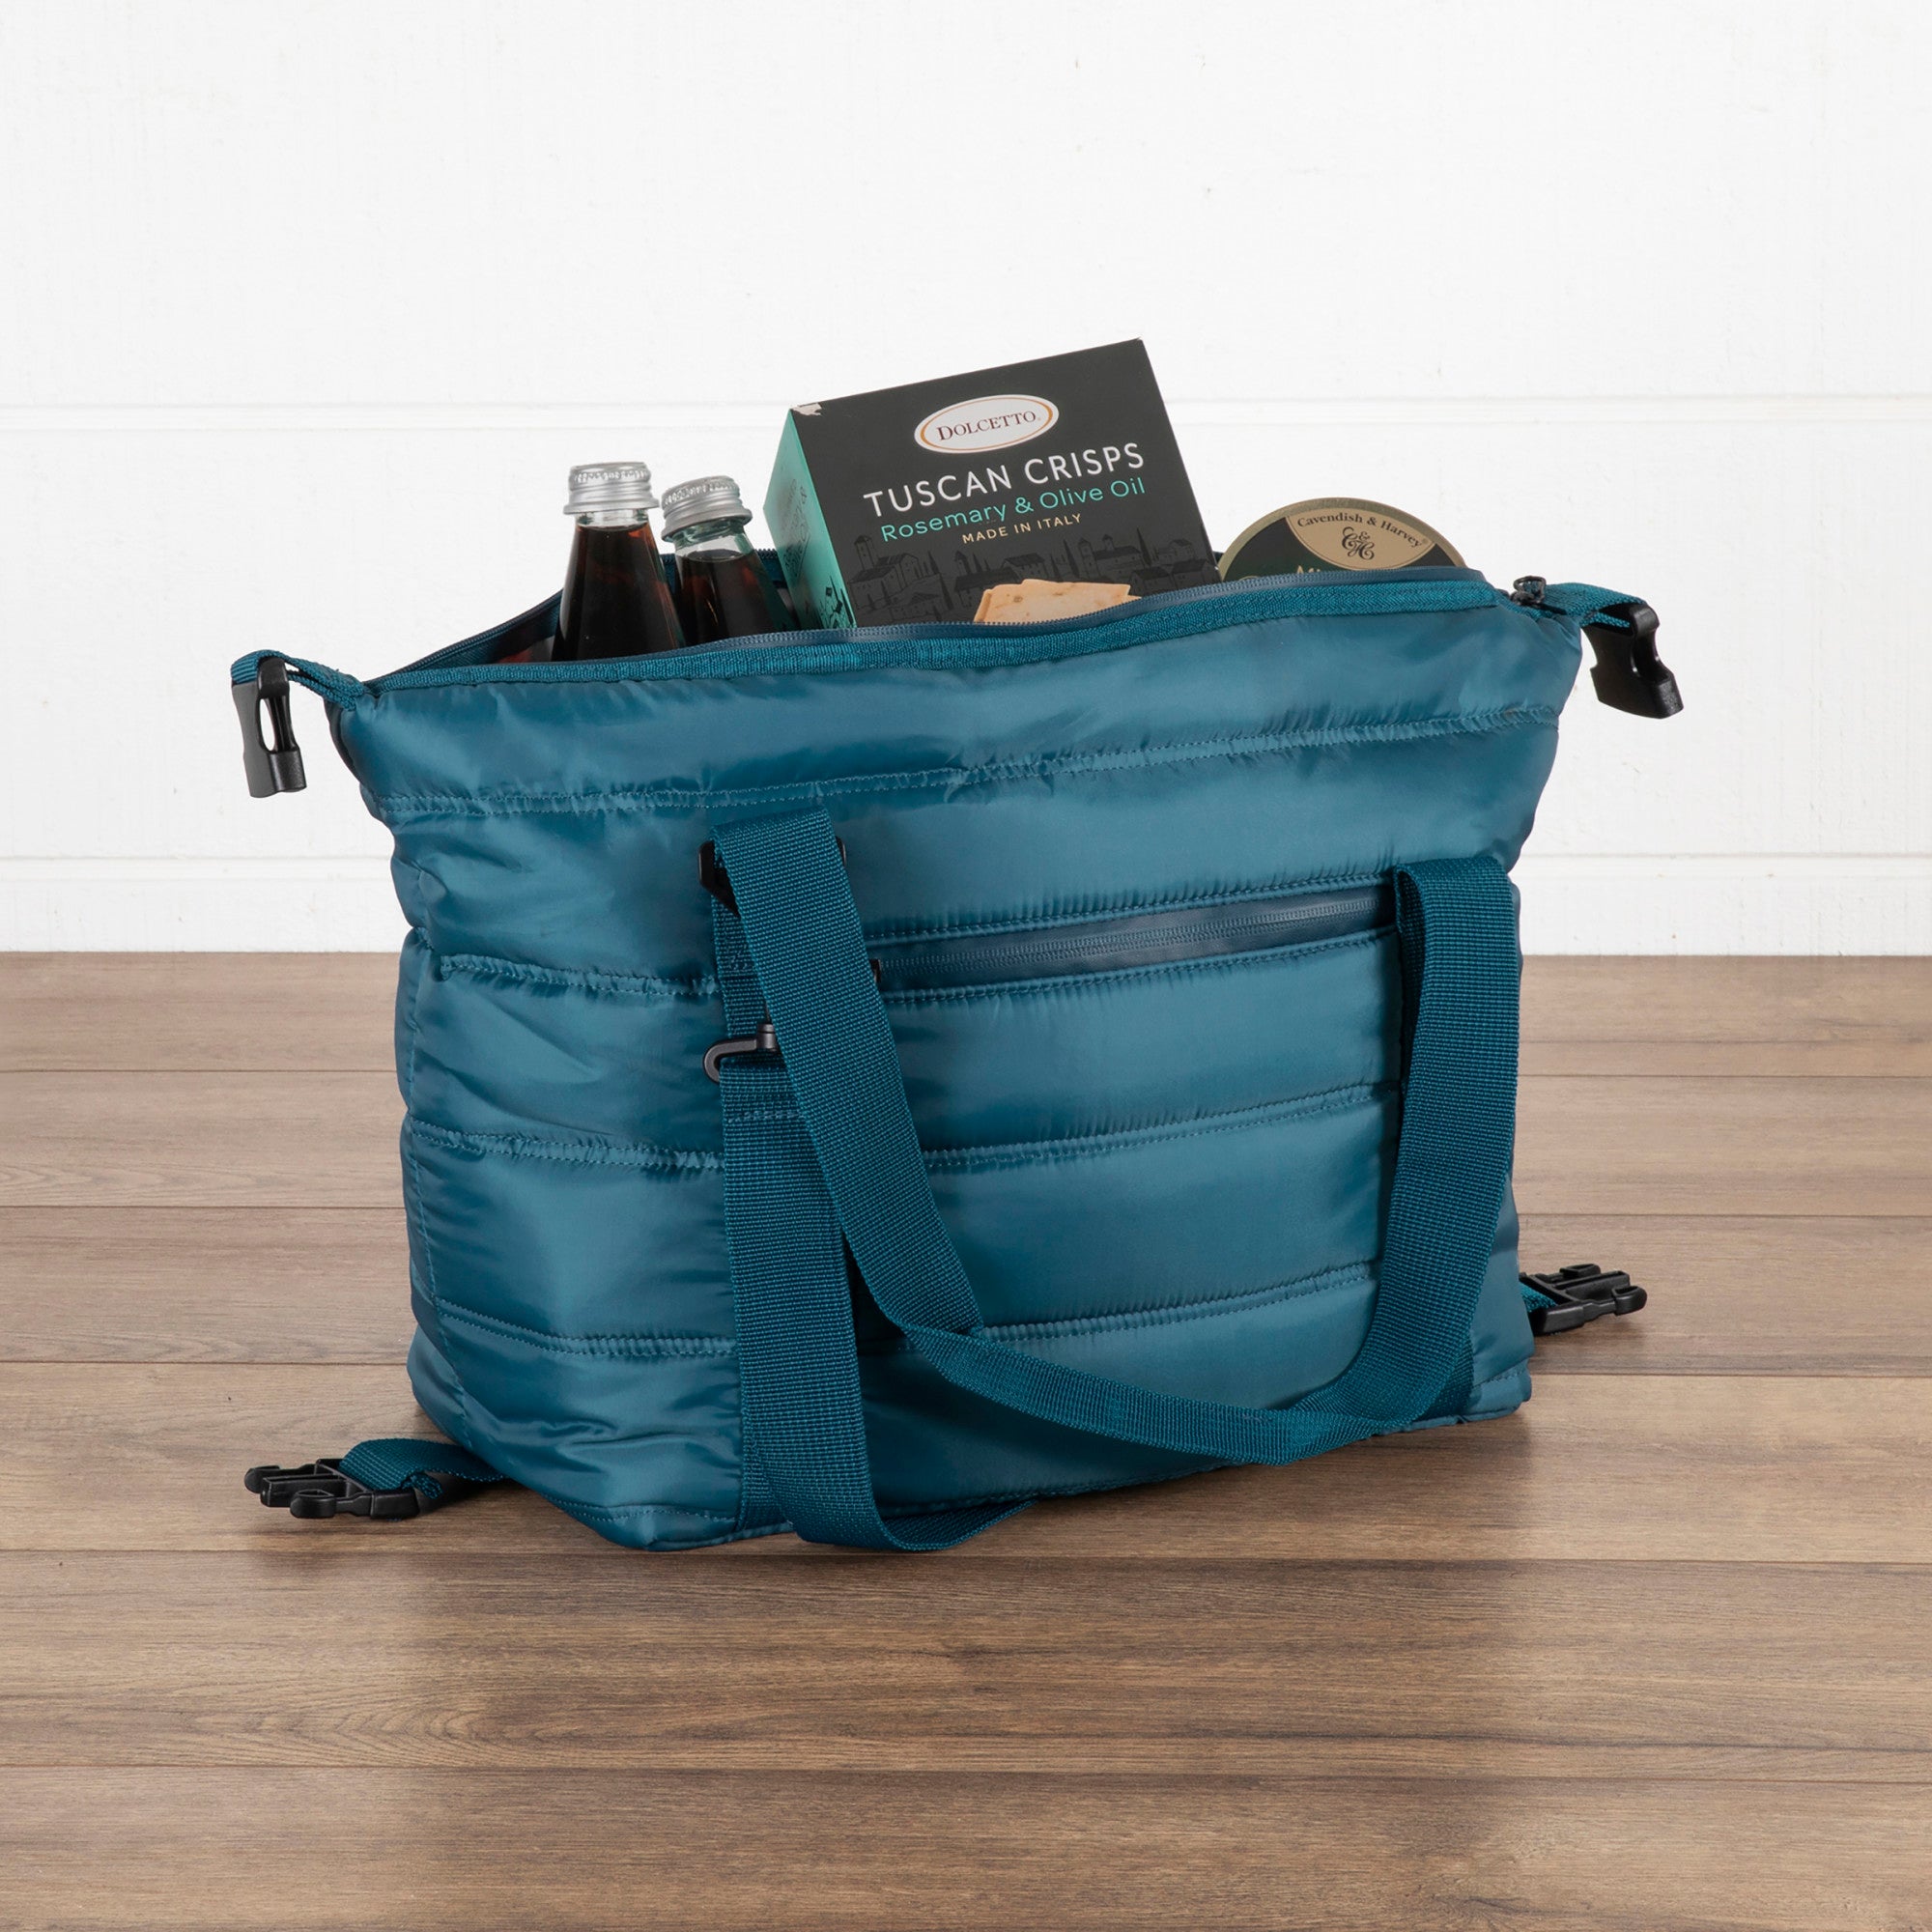 Bag and Purse Organizer with Zipper Top Style for OntheGo